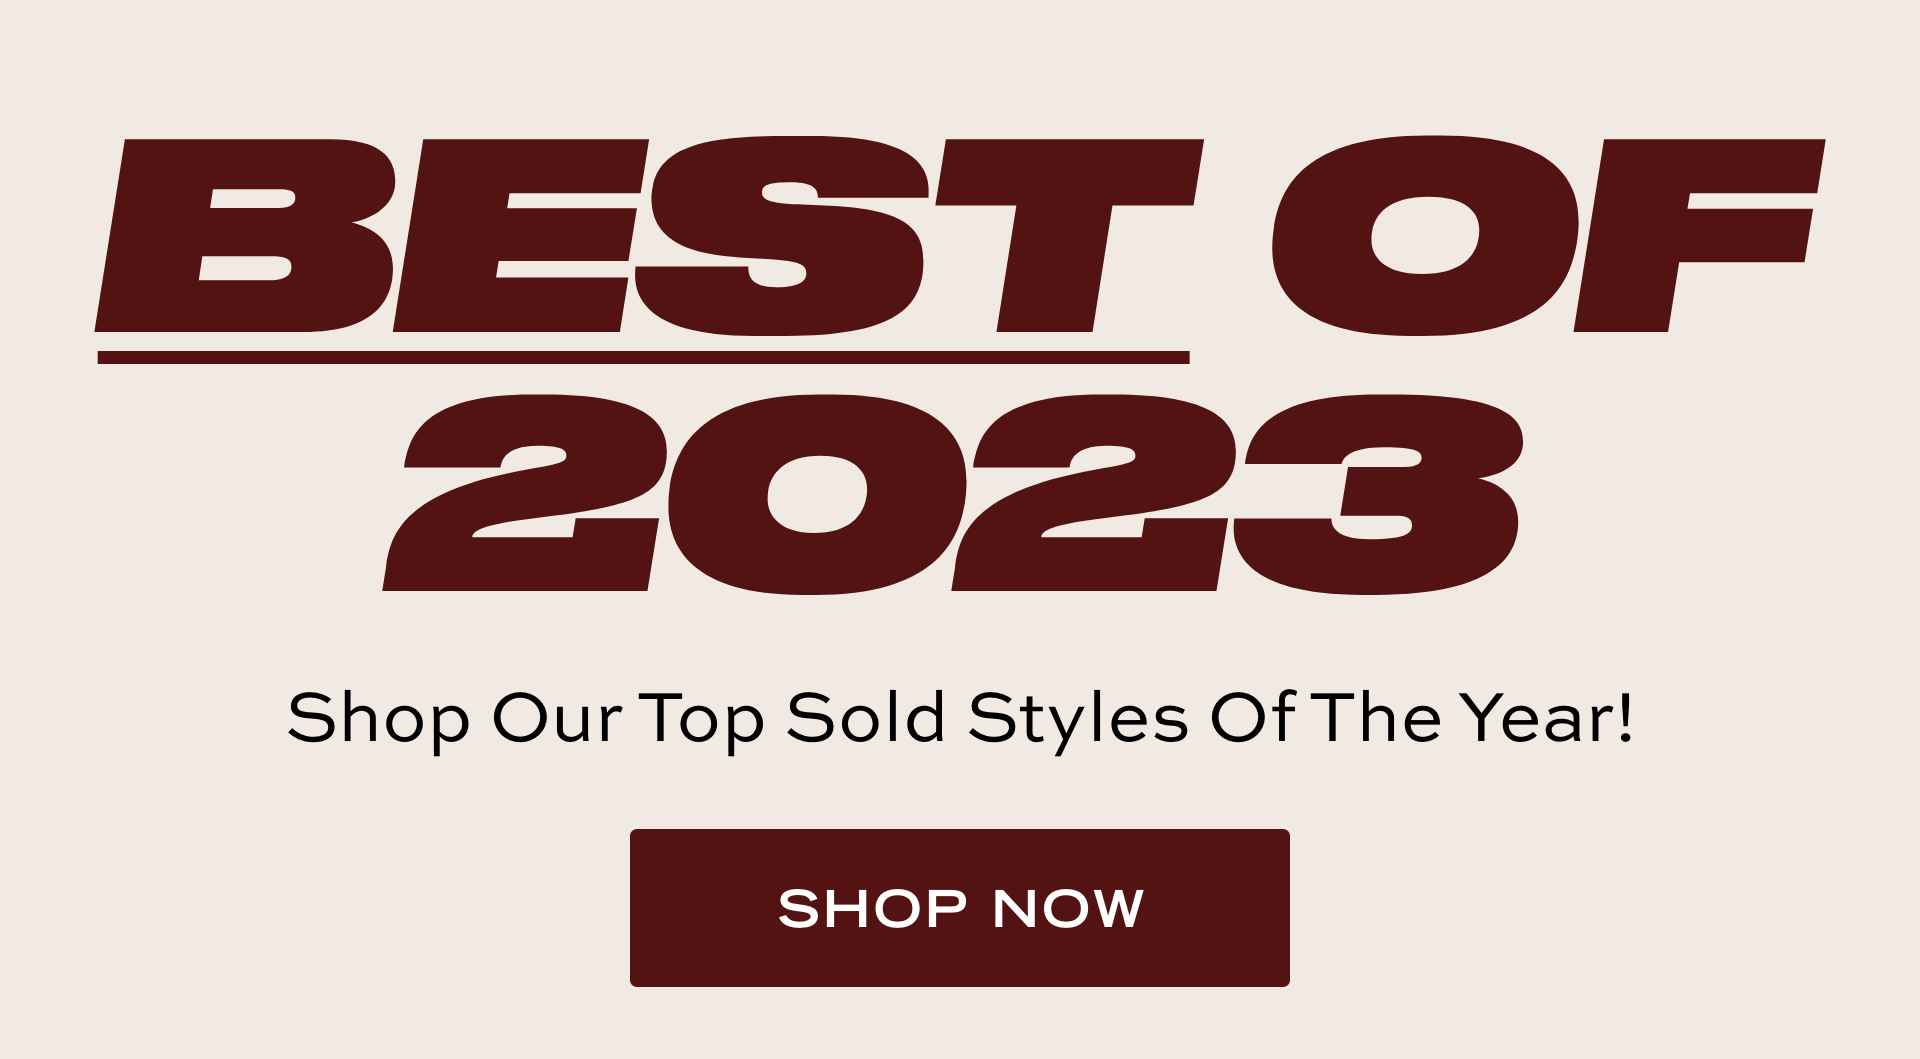 Shop Our Best Sellers of 2023 Now